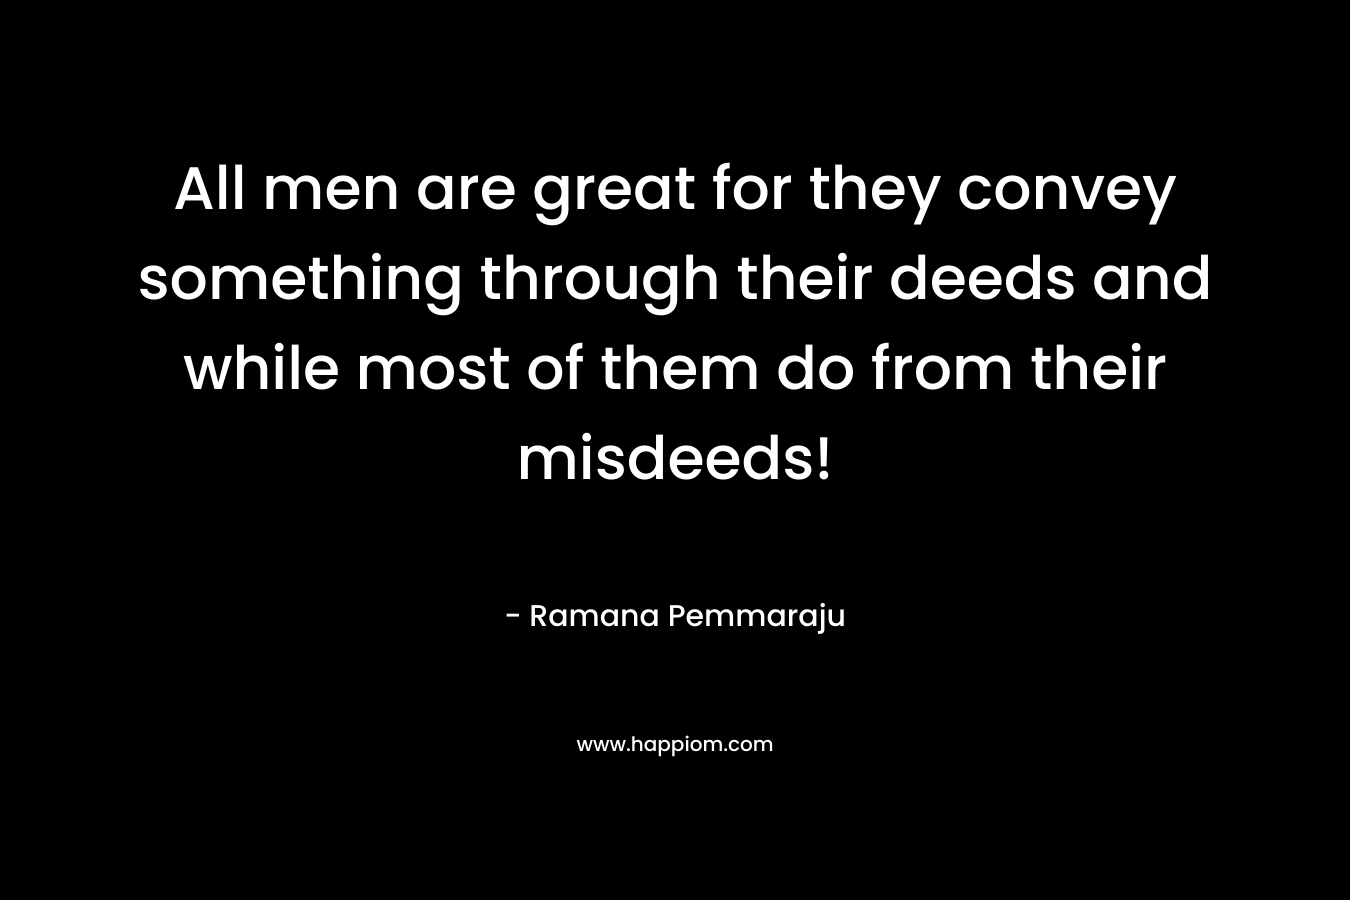 All men are great for they convey something through their deeds and while most of them do from their misdeeds! – Ramana Pemmaraju